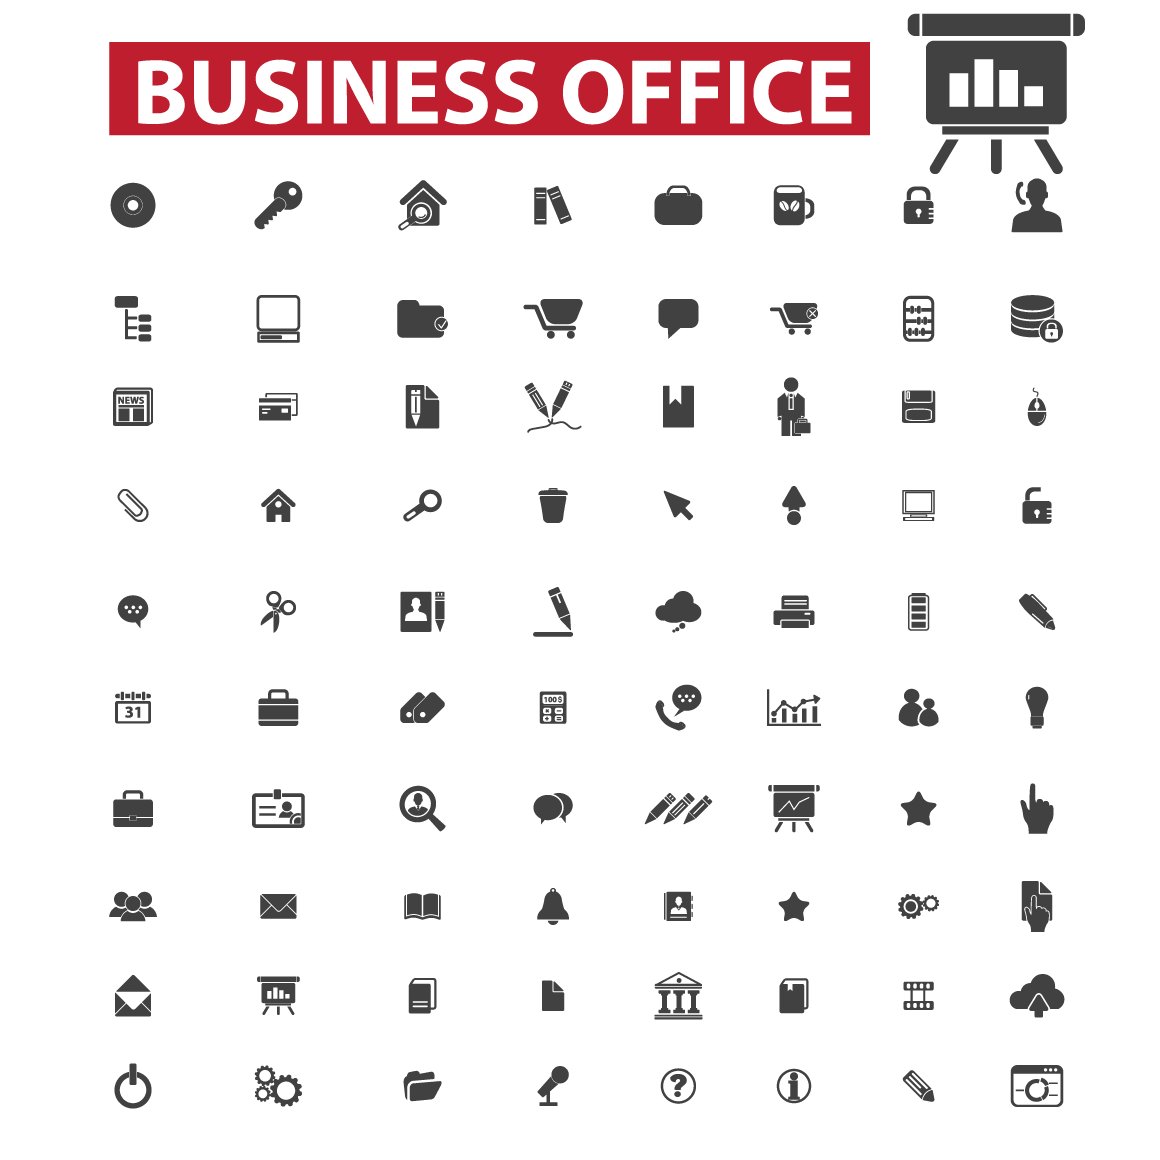 80 Business office icons preview image.